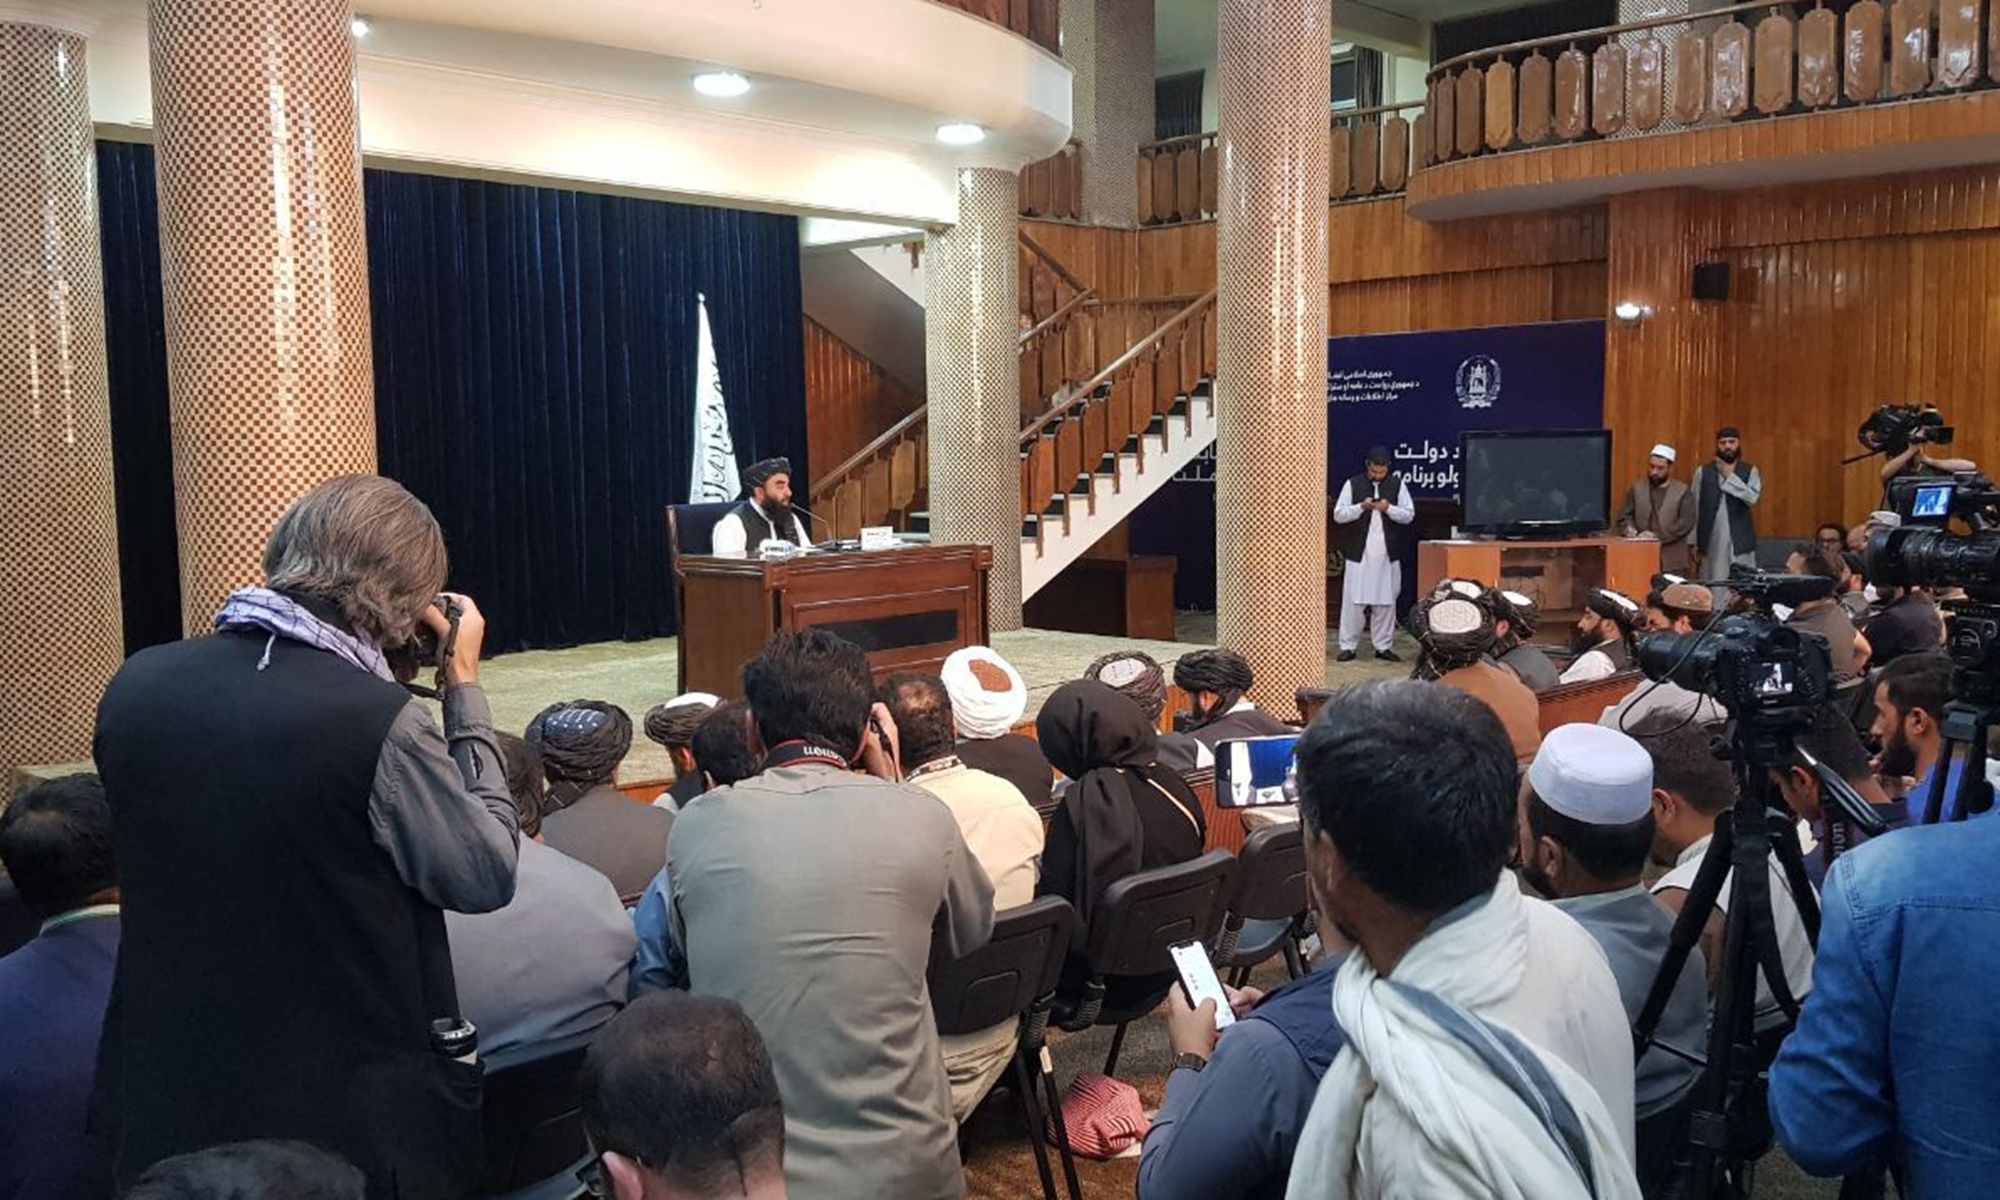 Taliban spokesperson Zabihullah Mujahid holds a press conference in Kabul, Afghanistan on Tuesday. Mujahid announced the new government to rule the country. The Taliban announced Mullah Mohammad Hasan Akhund as the interim leader, while giving key positions to some of the movement's top officials. Photo: AFP